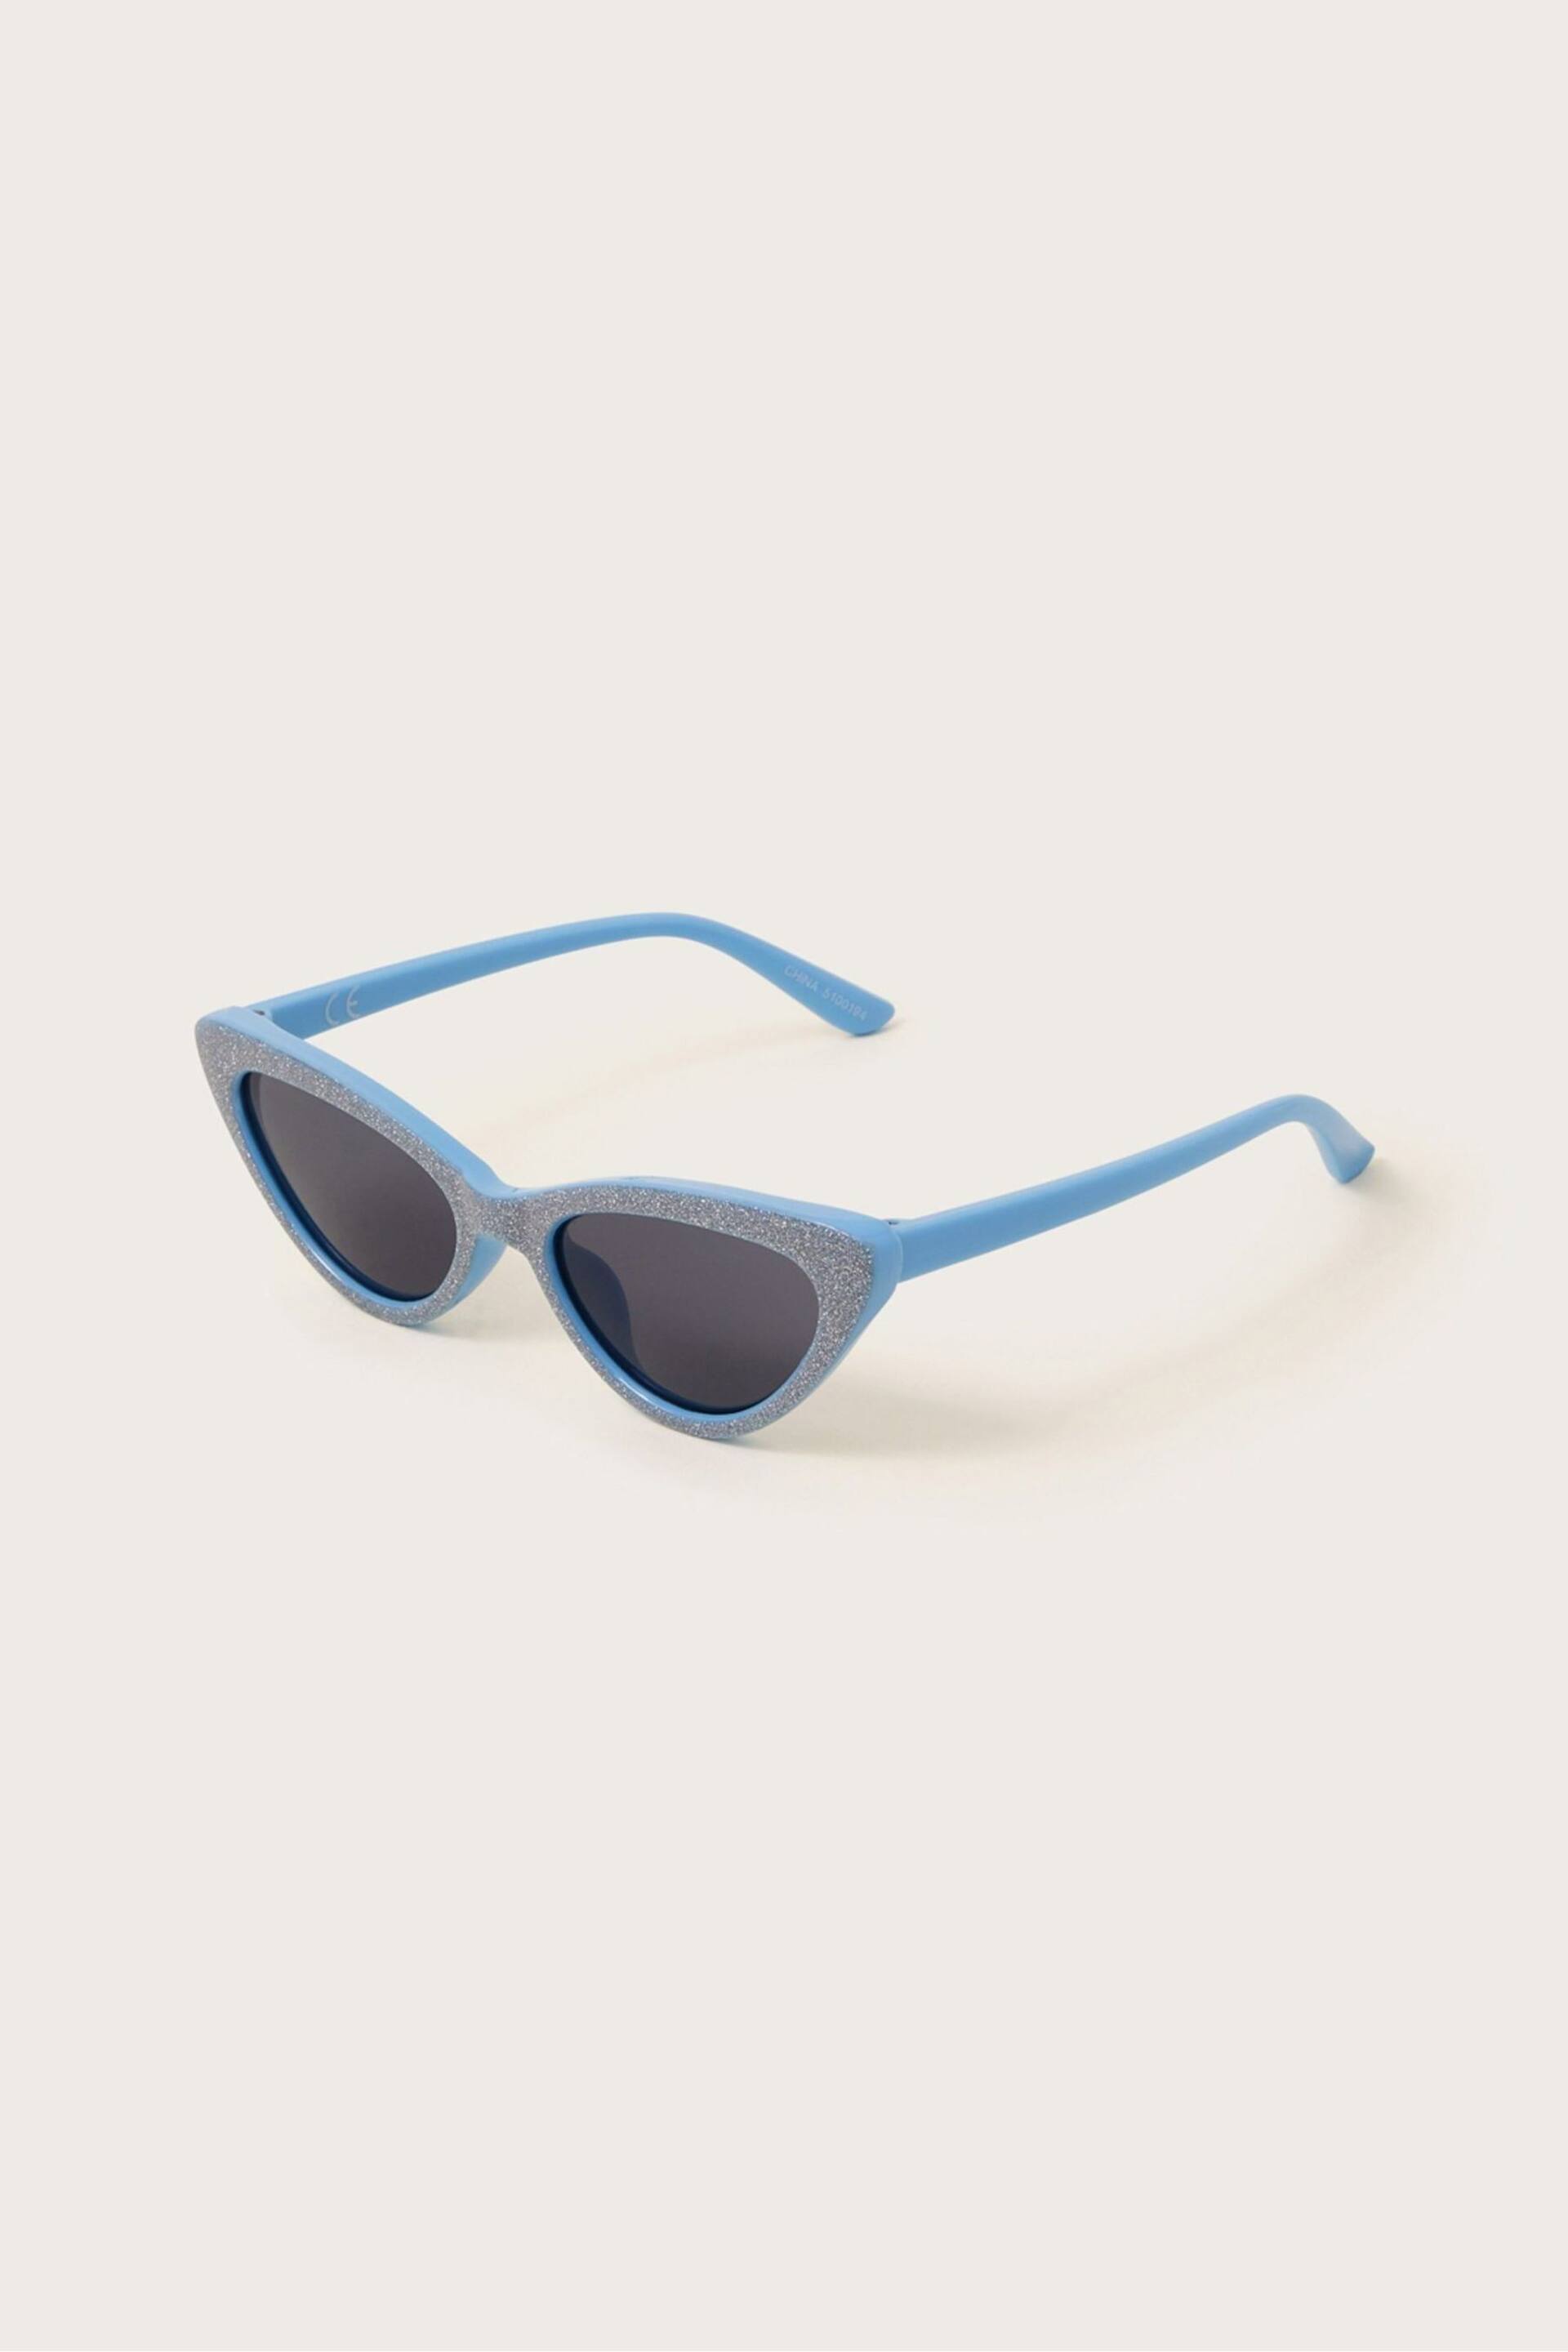 Monsoon Blue Sparkle Cat-Eye Sunglasses with Case - Image 1 of 2